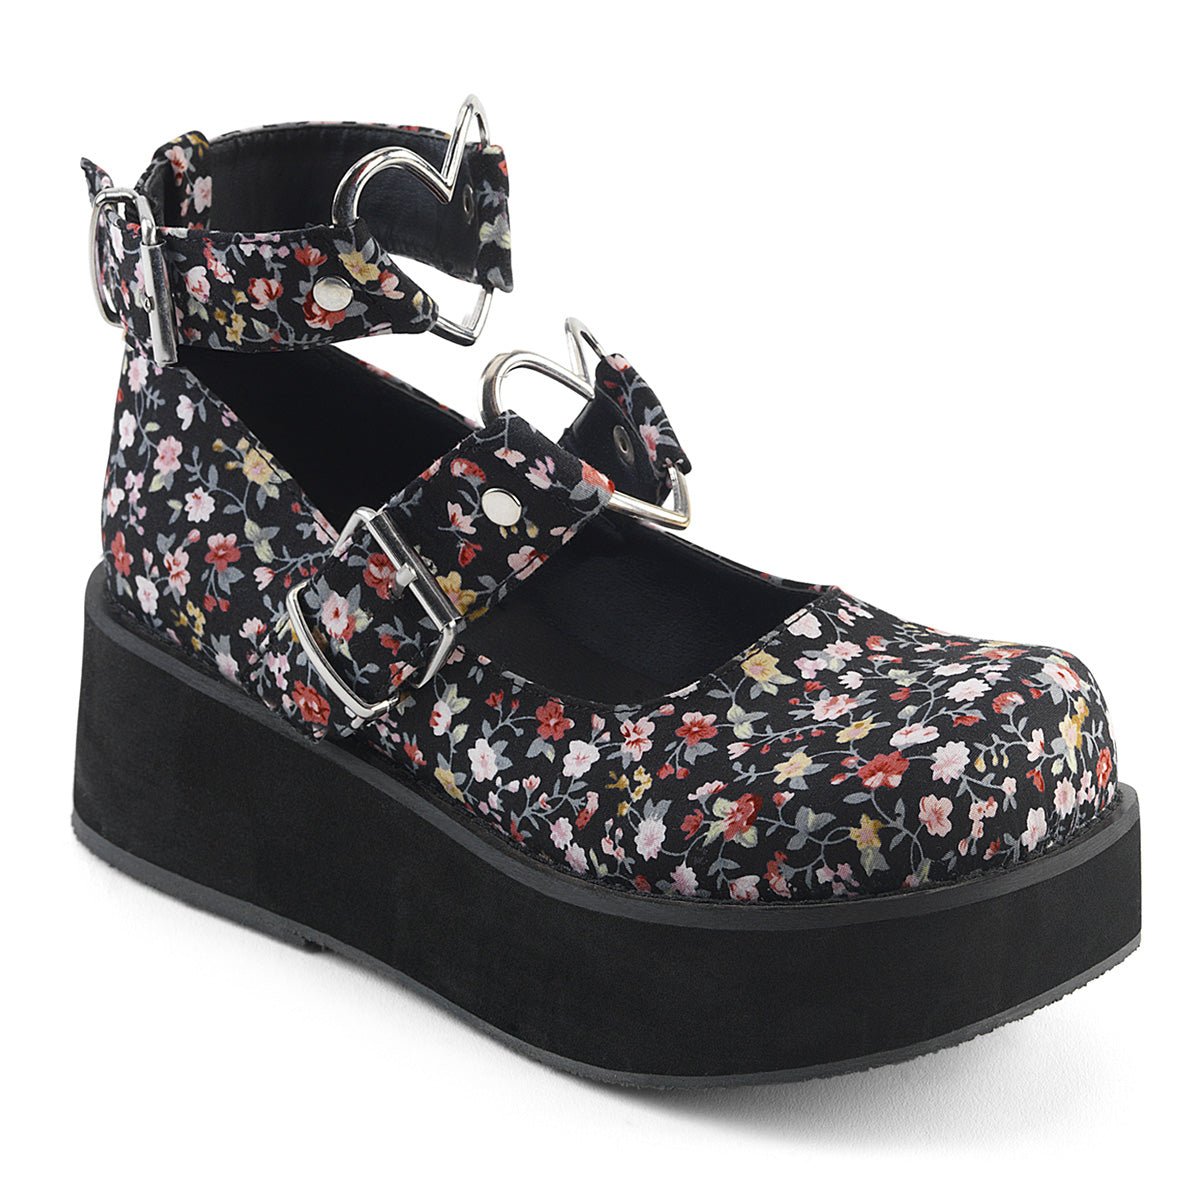 Too Fast | Demonia Sprite 02 | Floral Fabric Women's Mary Janes